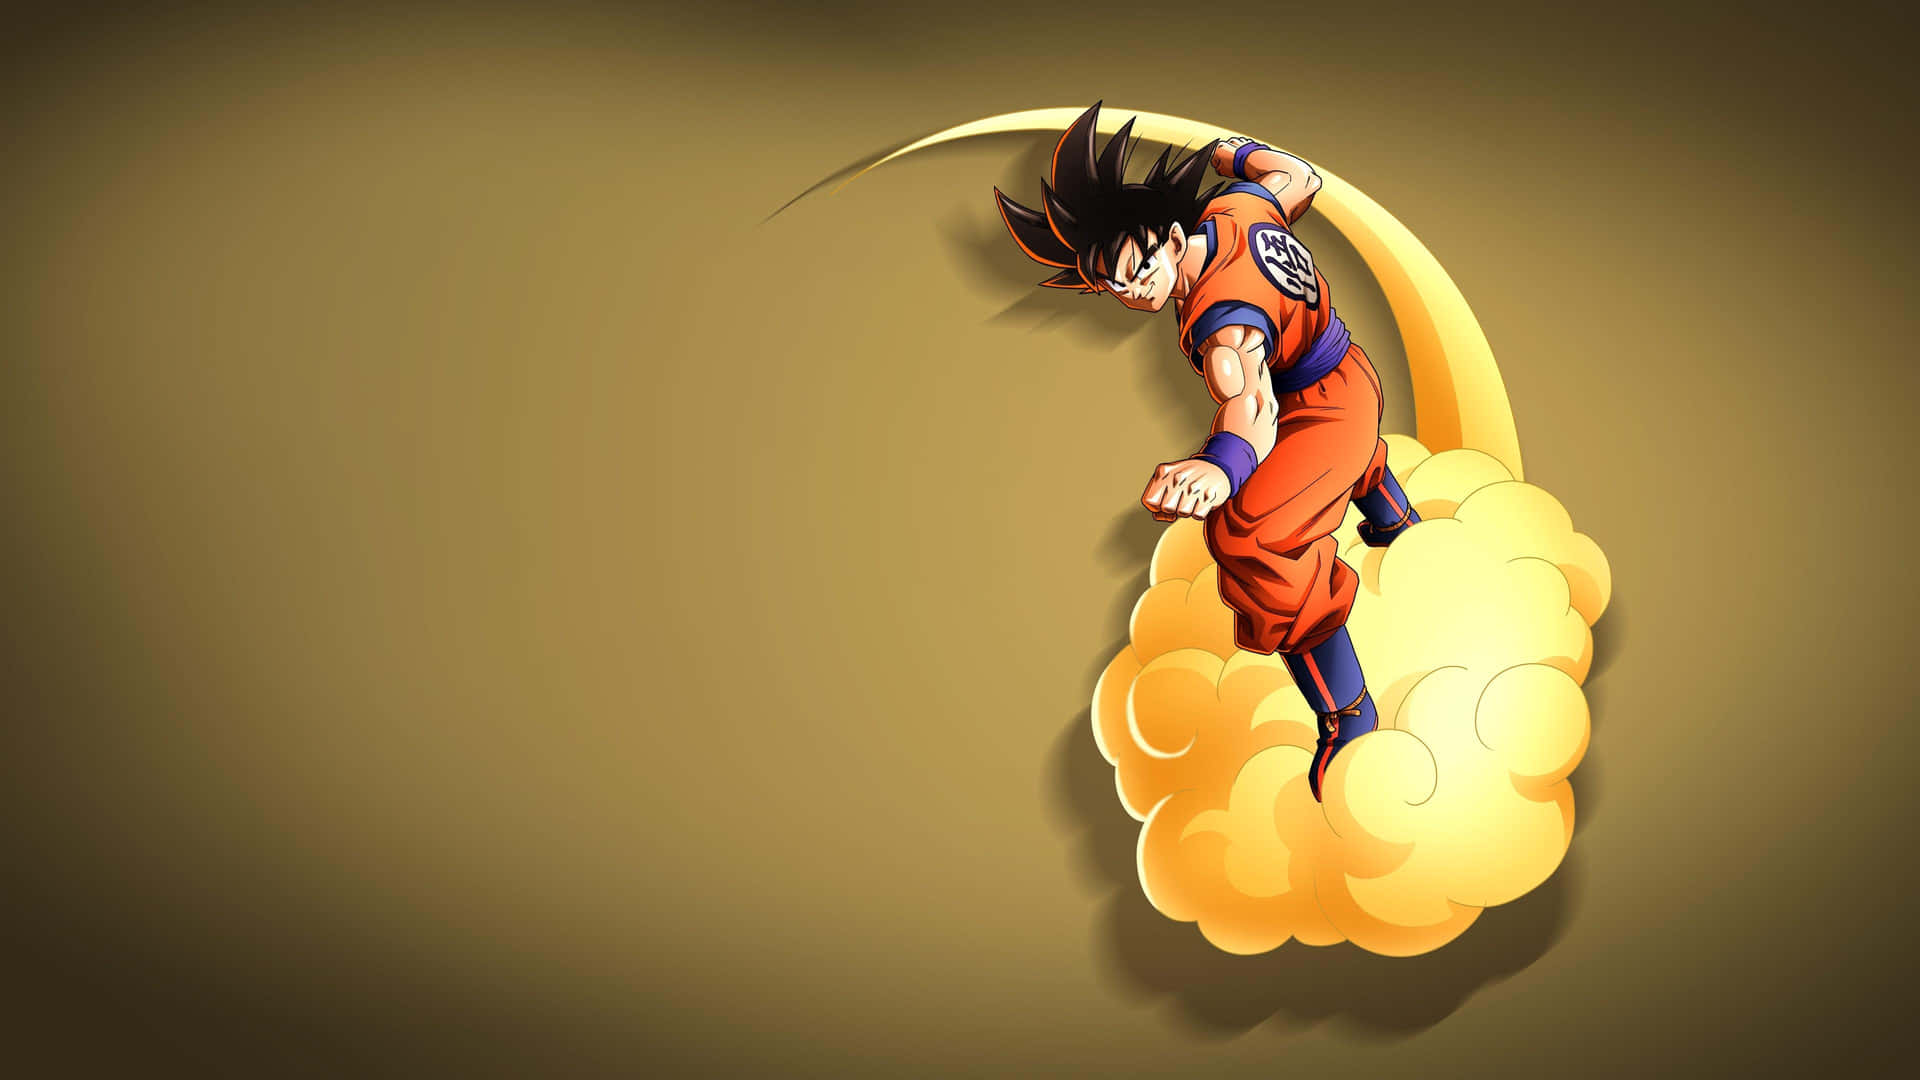 Explore the mysterious landscape of the Dragon Ball world! Wallpaper